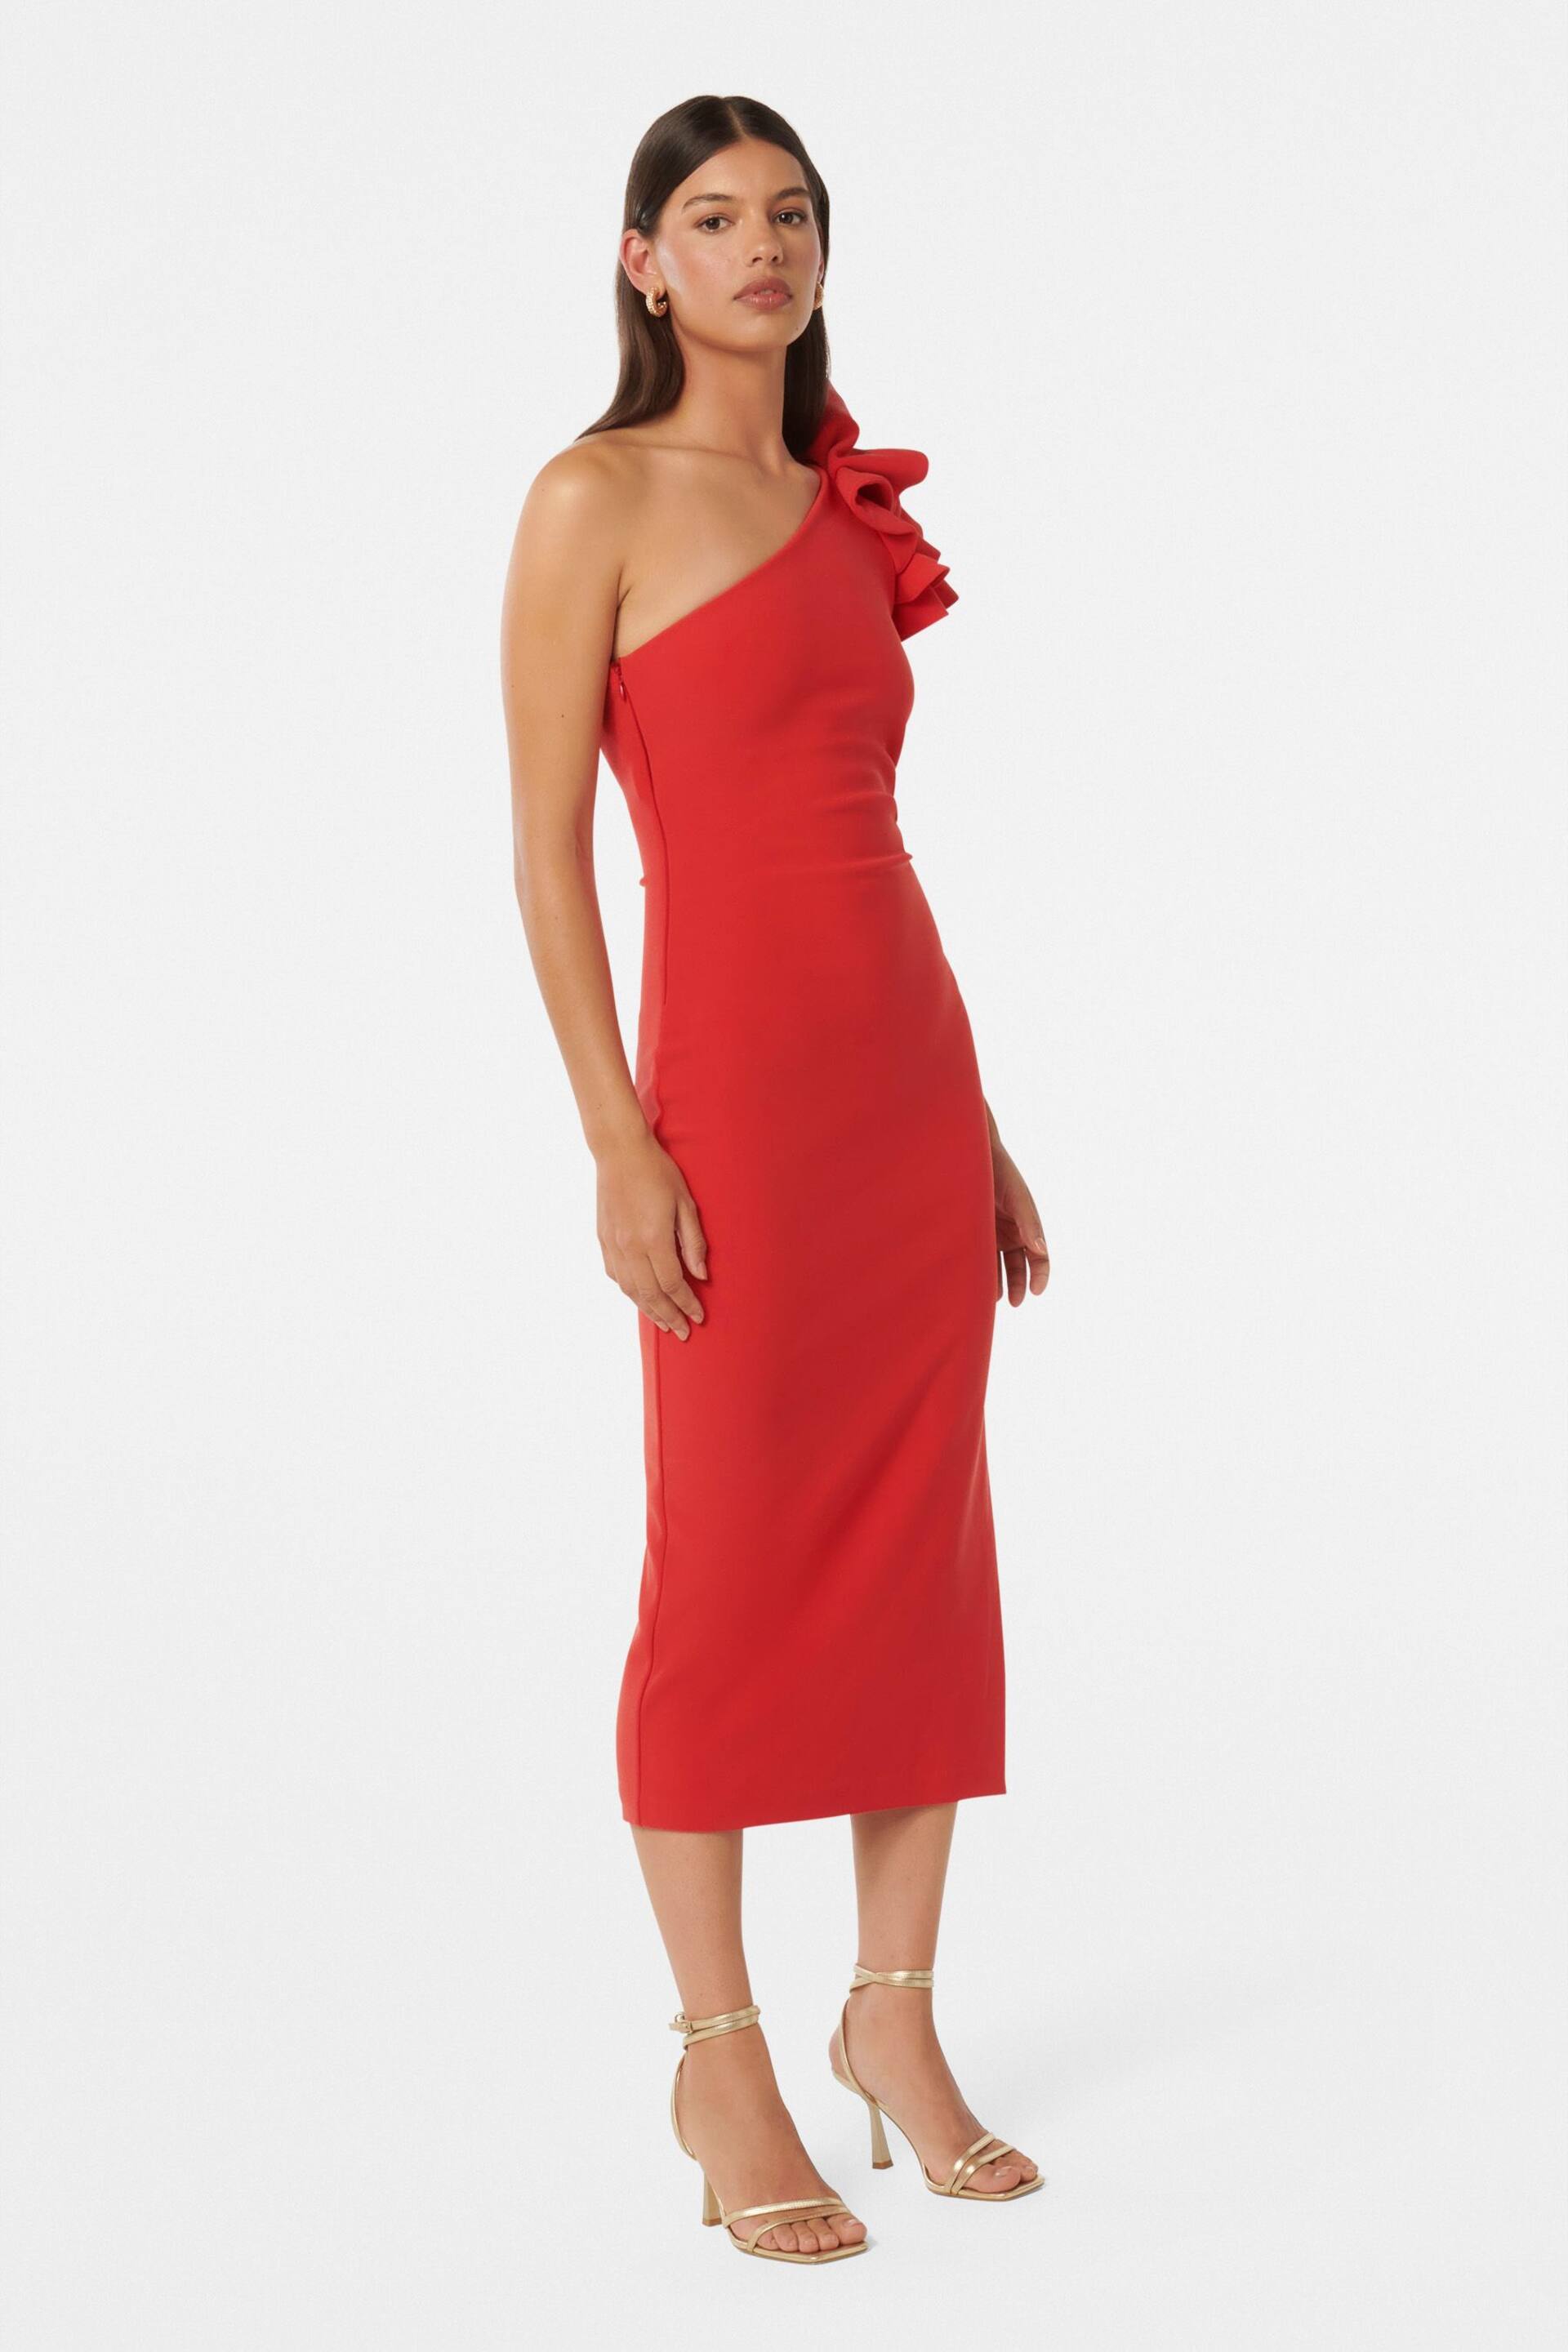 Forever New Red Celeste One Shoulder Ruffle Bodycon Dress - Image 5 of 6